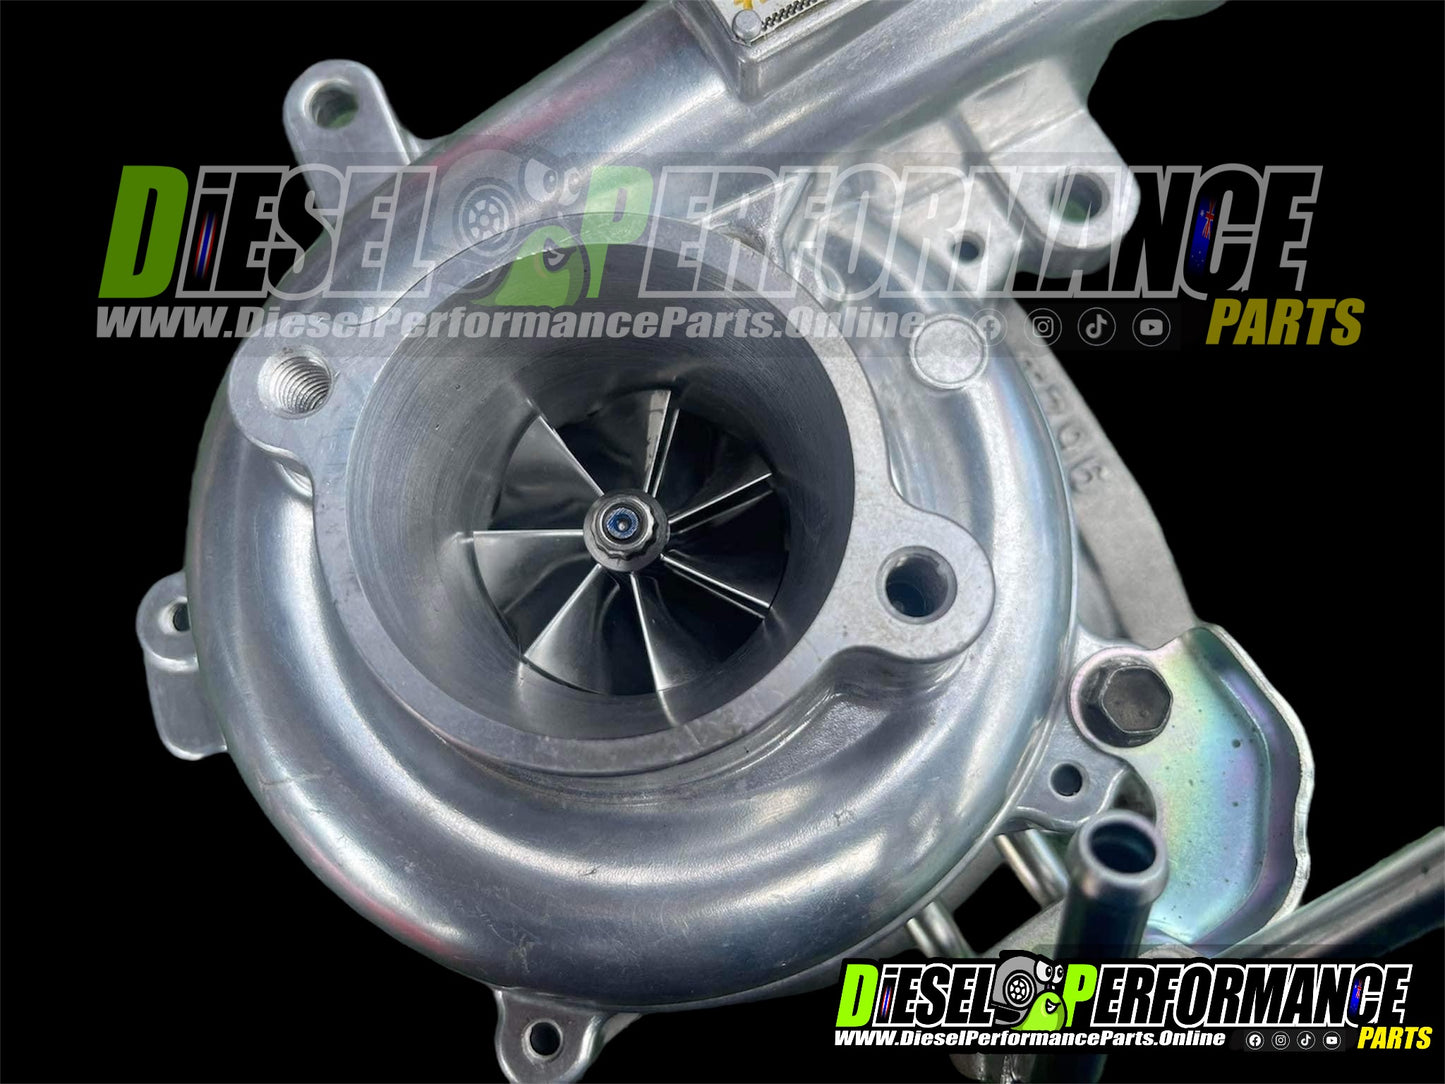 44mm [SKS] 1KD Bolt-On Turbo 300HP+ Rated (THA Stock)